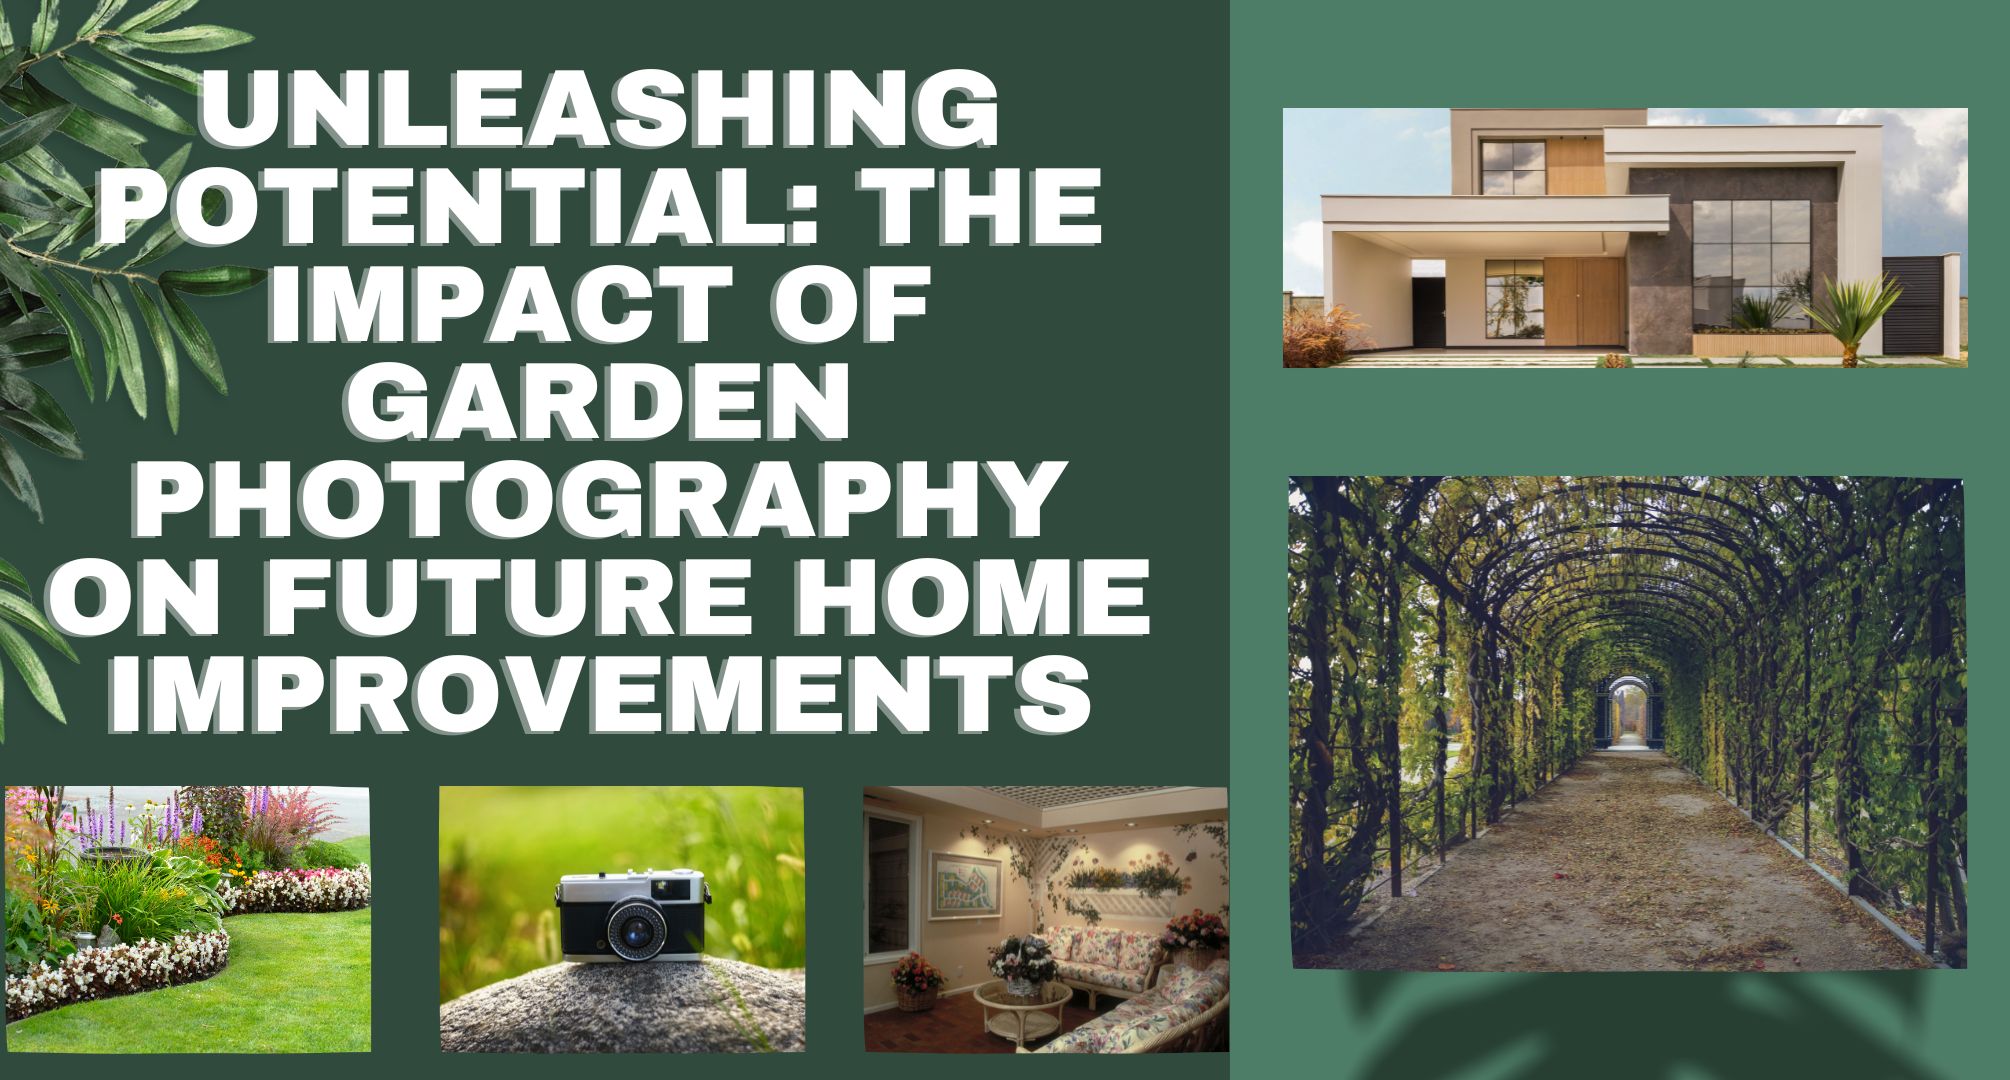 Unleashing Potential: The Impact of Garden Photography on Future Home Improvements